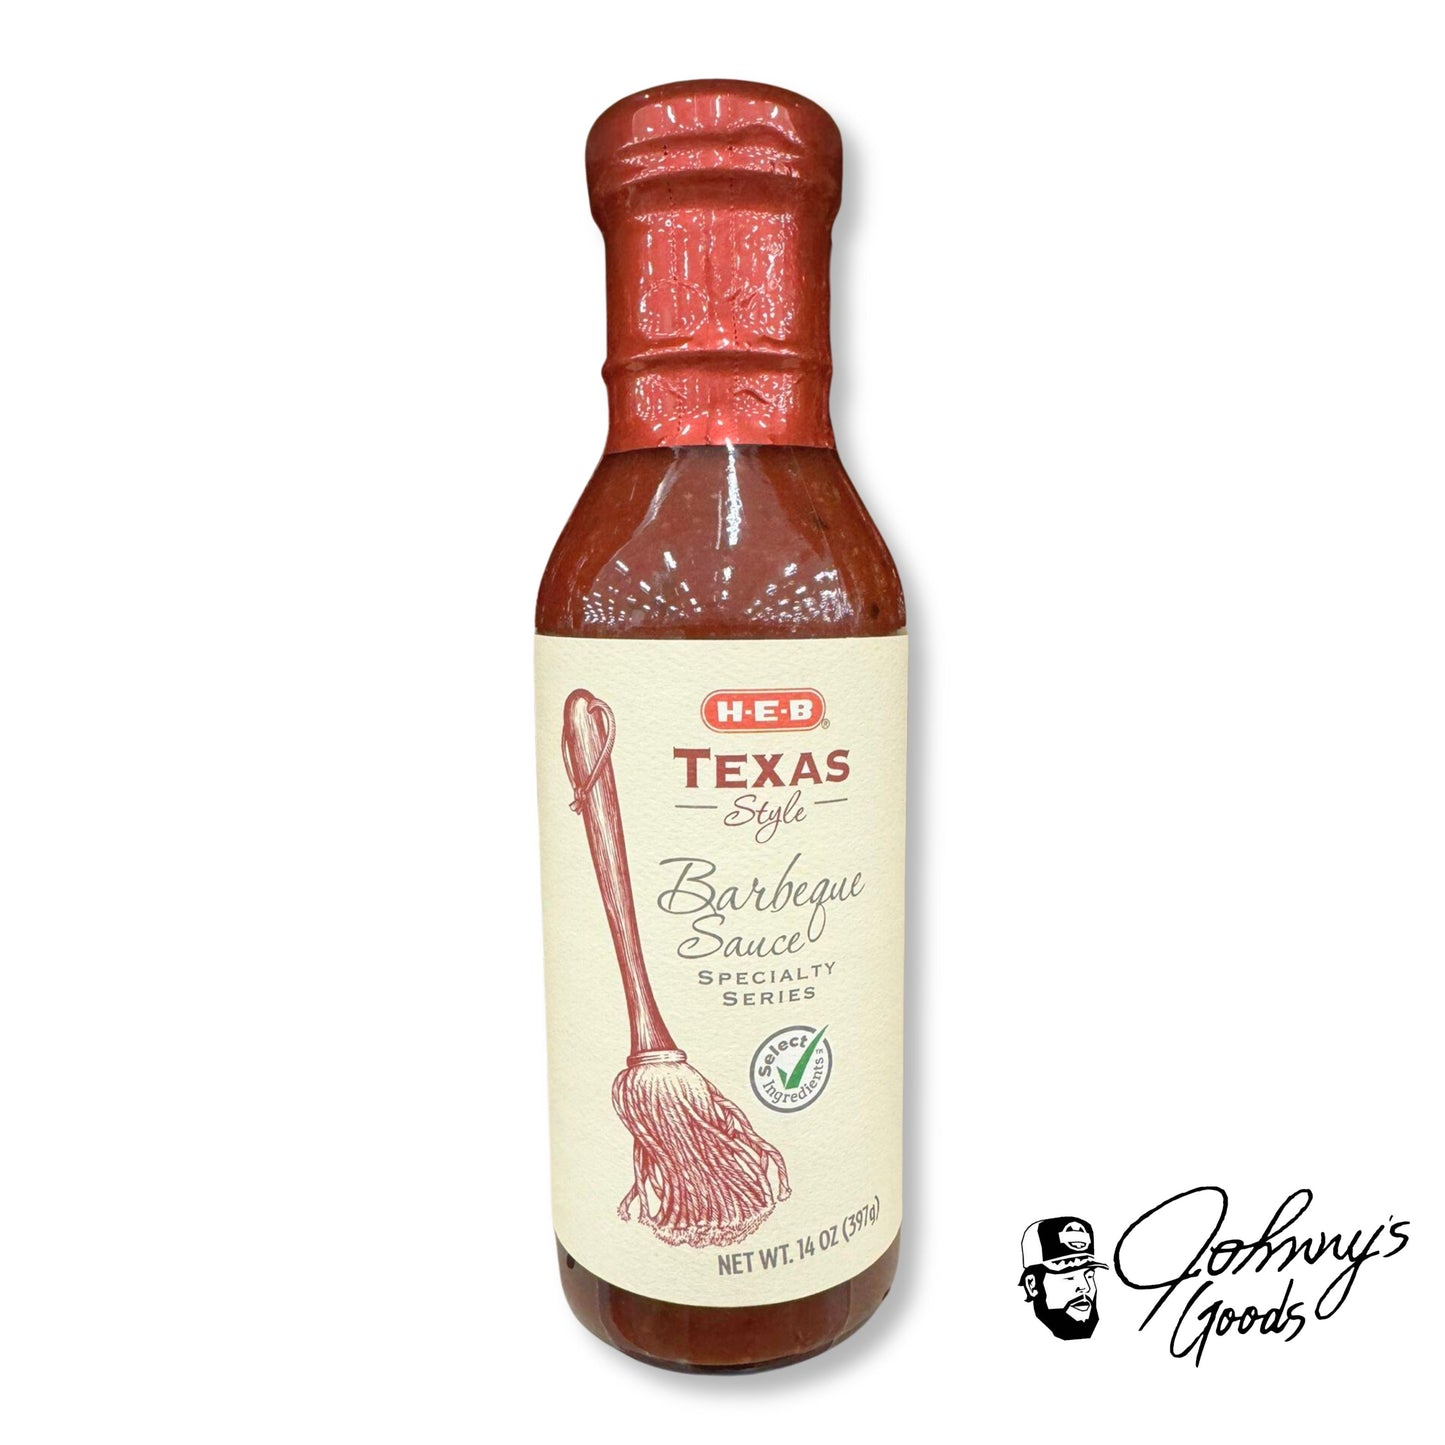 H‑E‑B Barbeque Sauce Specialty Series heb texas barbecue flavors sauces heat tx city